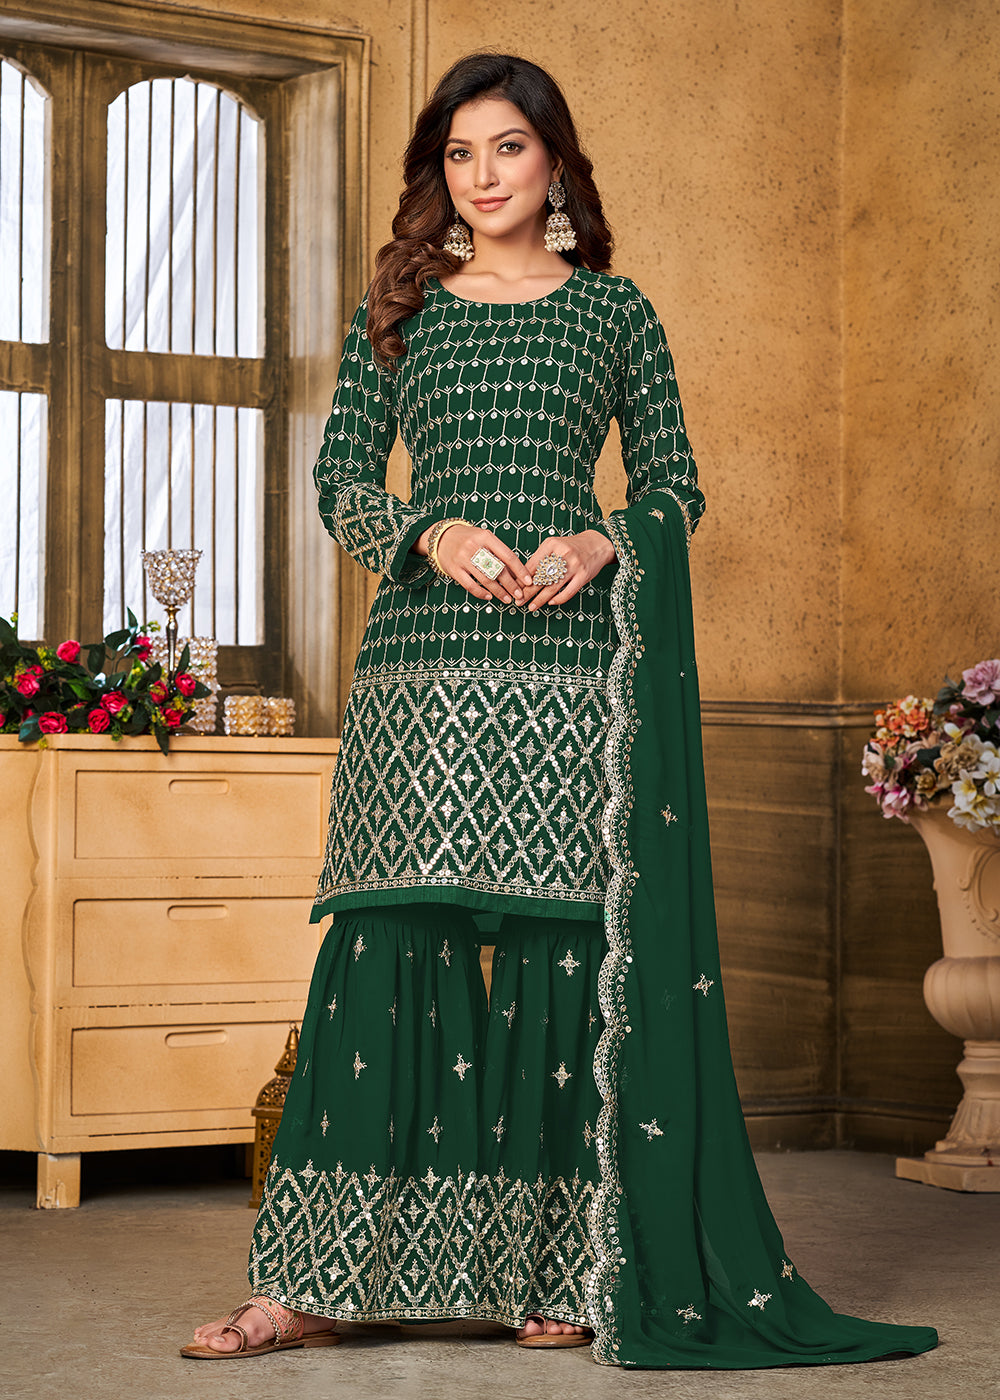 Shop Now Pretty Sequins Embroidered Green Festive Gharara Style Suit Online at Empress Clothing in USA, UK, Canada, Italy & Worldwide.